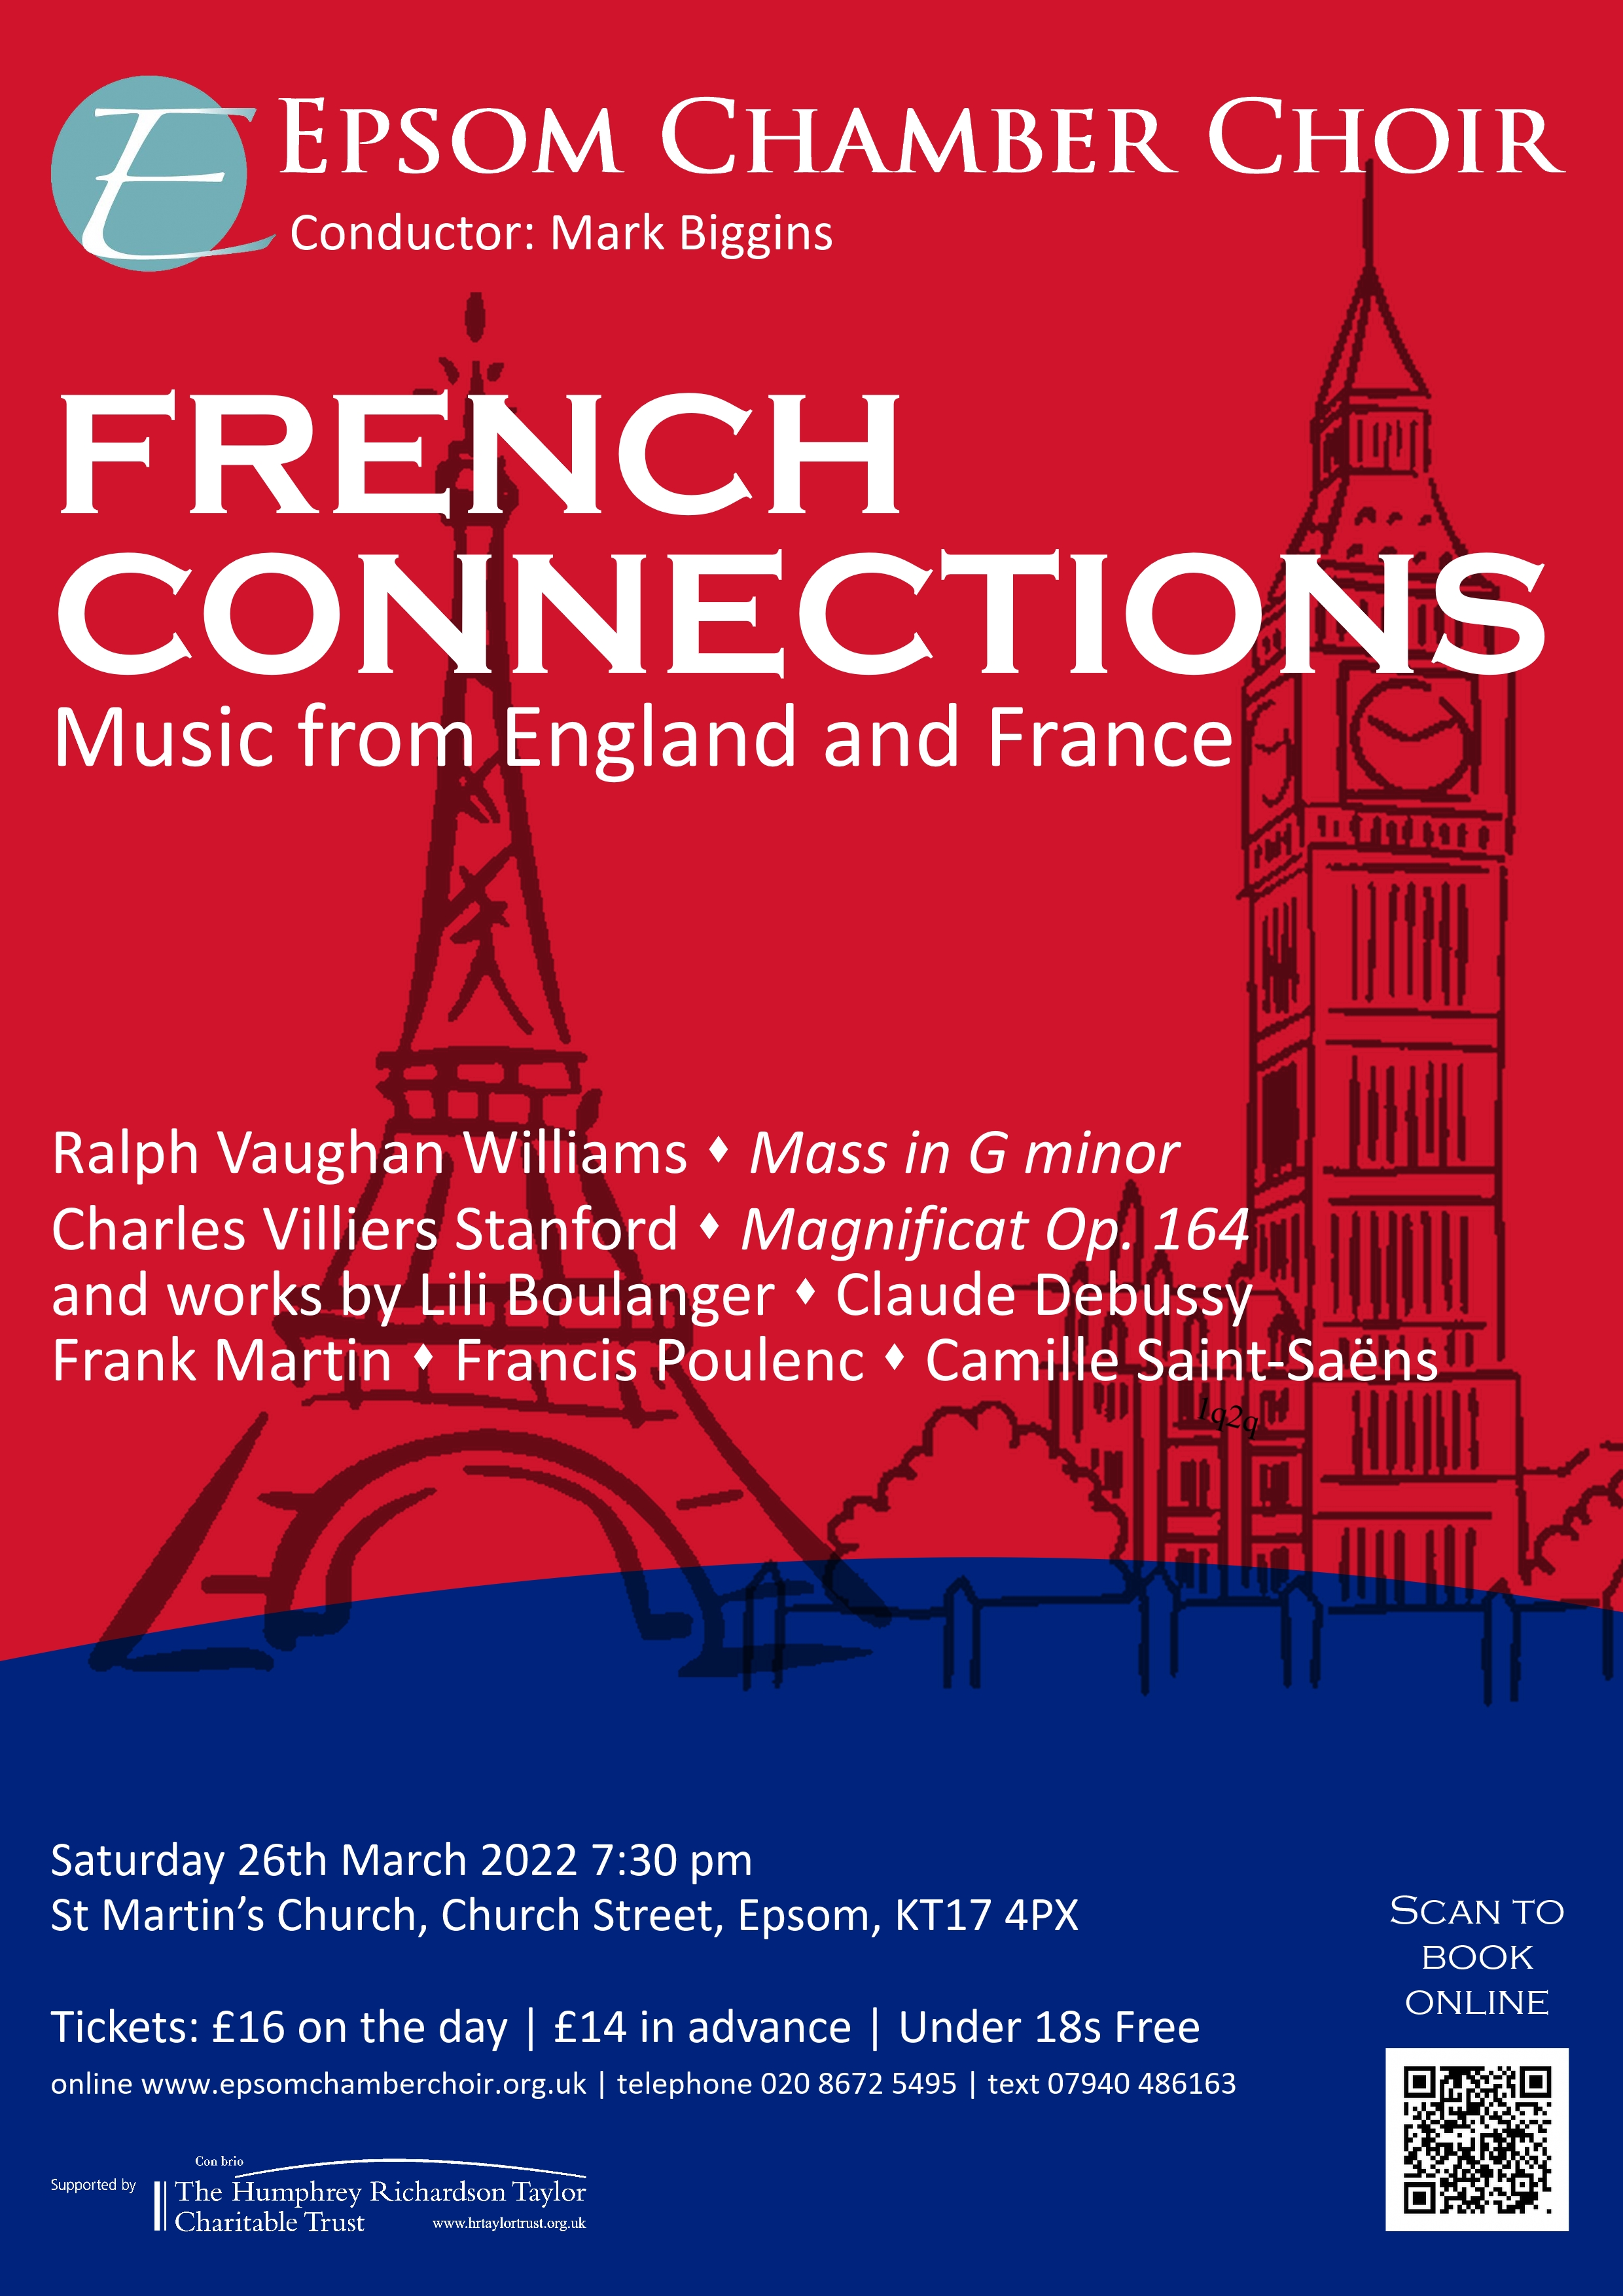 French Connections concert, Epsom Chamber Choir